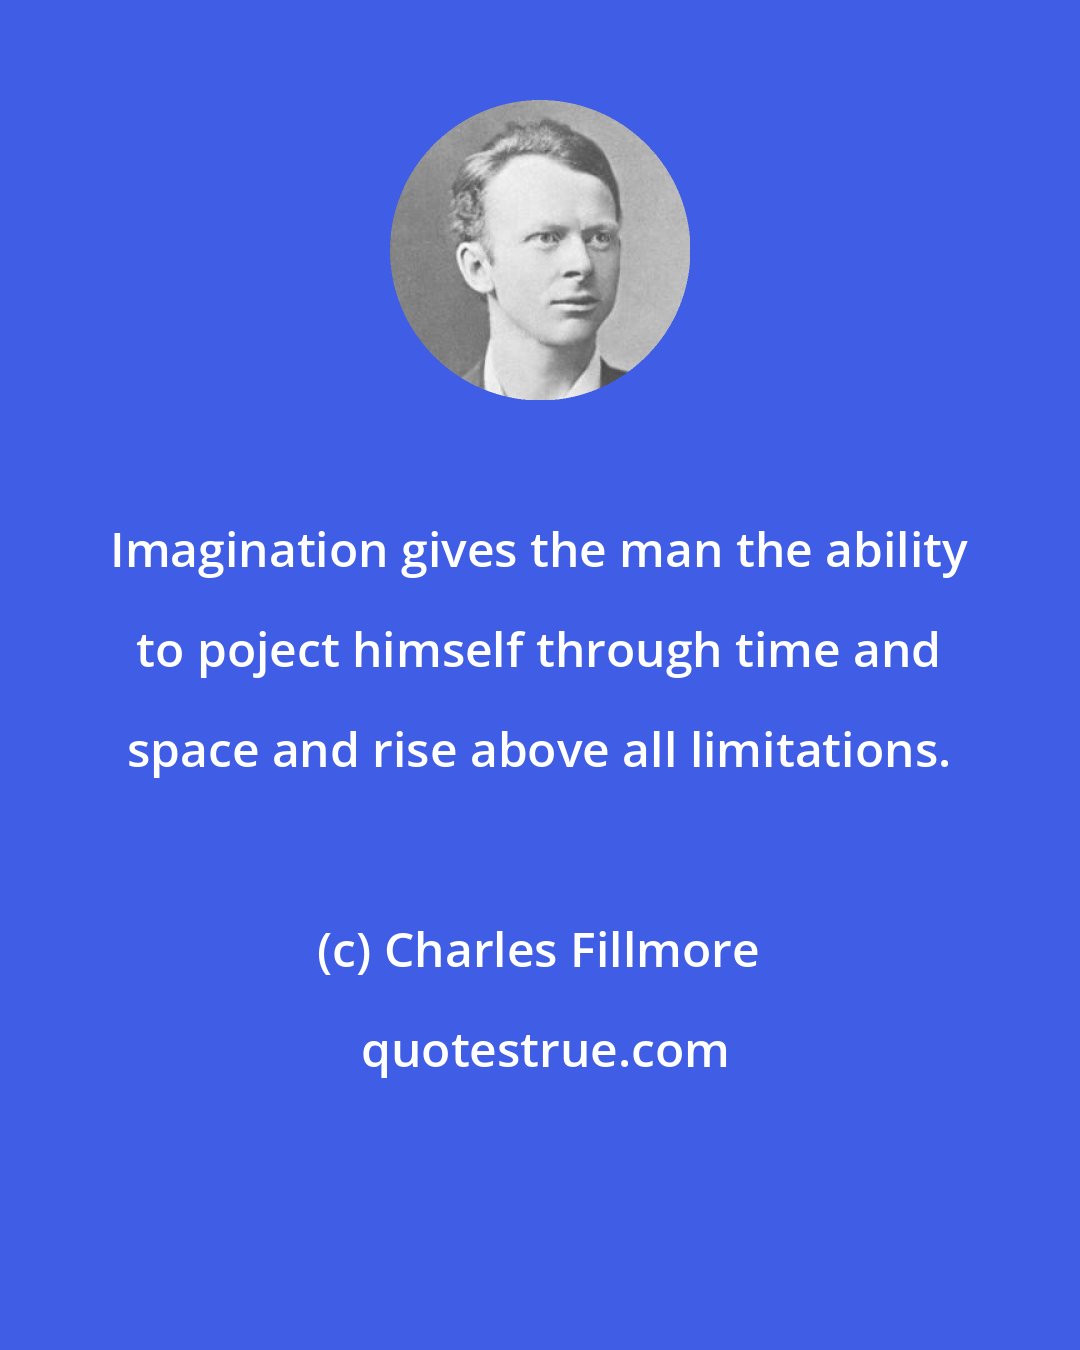 Charles Fillmore: Imagination gives the man the ability to poject himself through time and space and rise above all limitations.